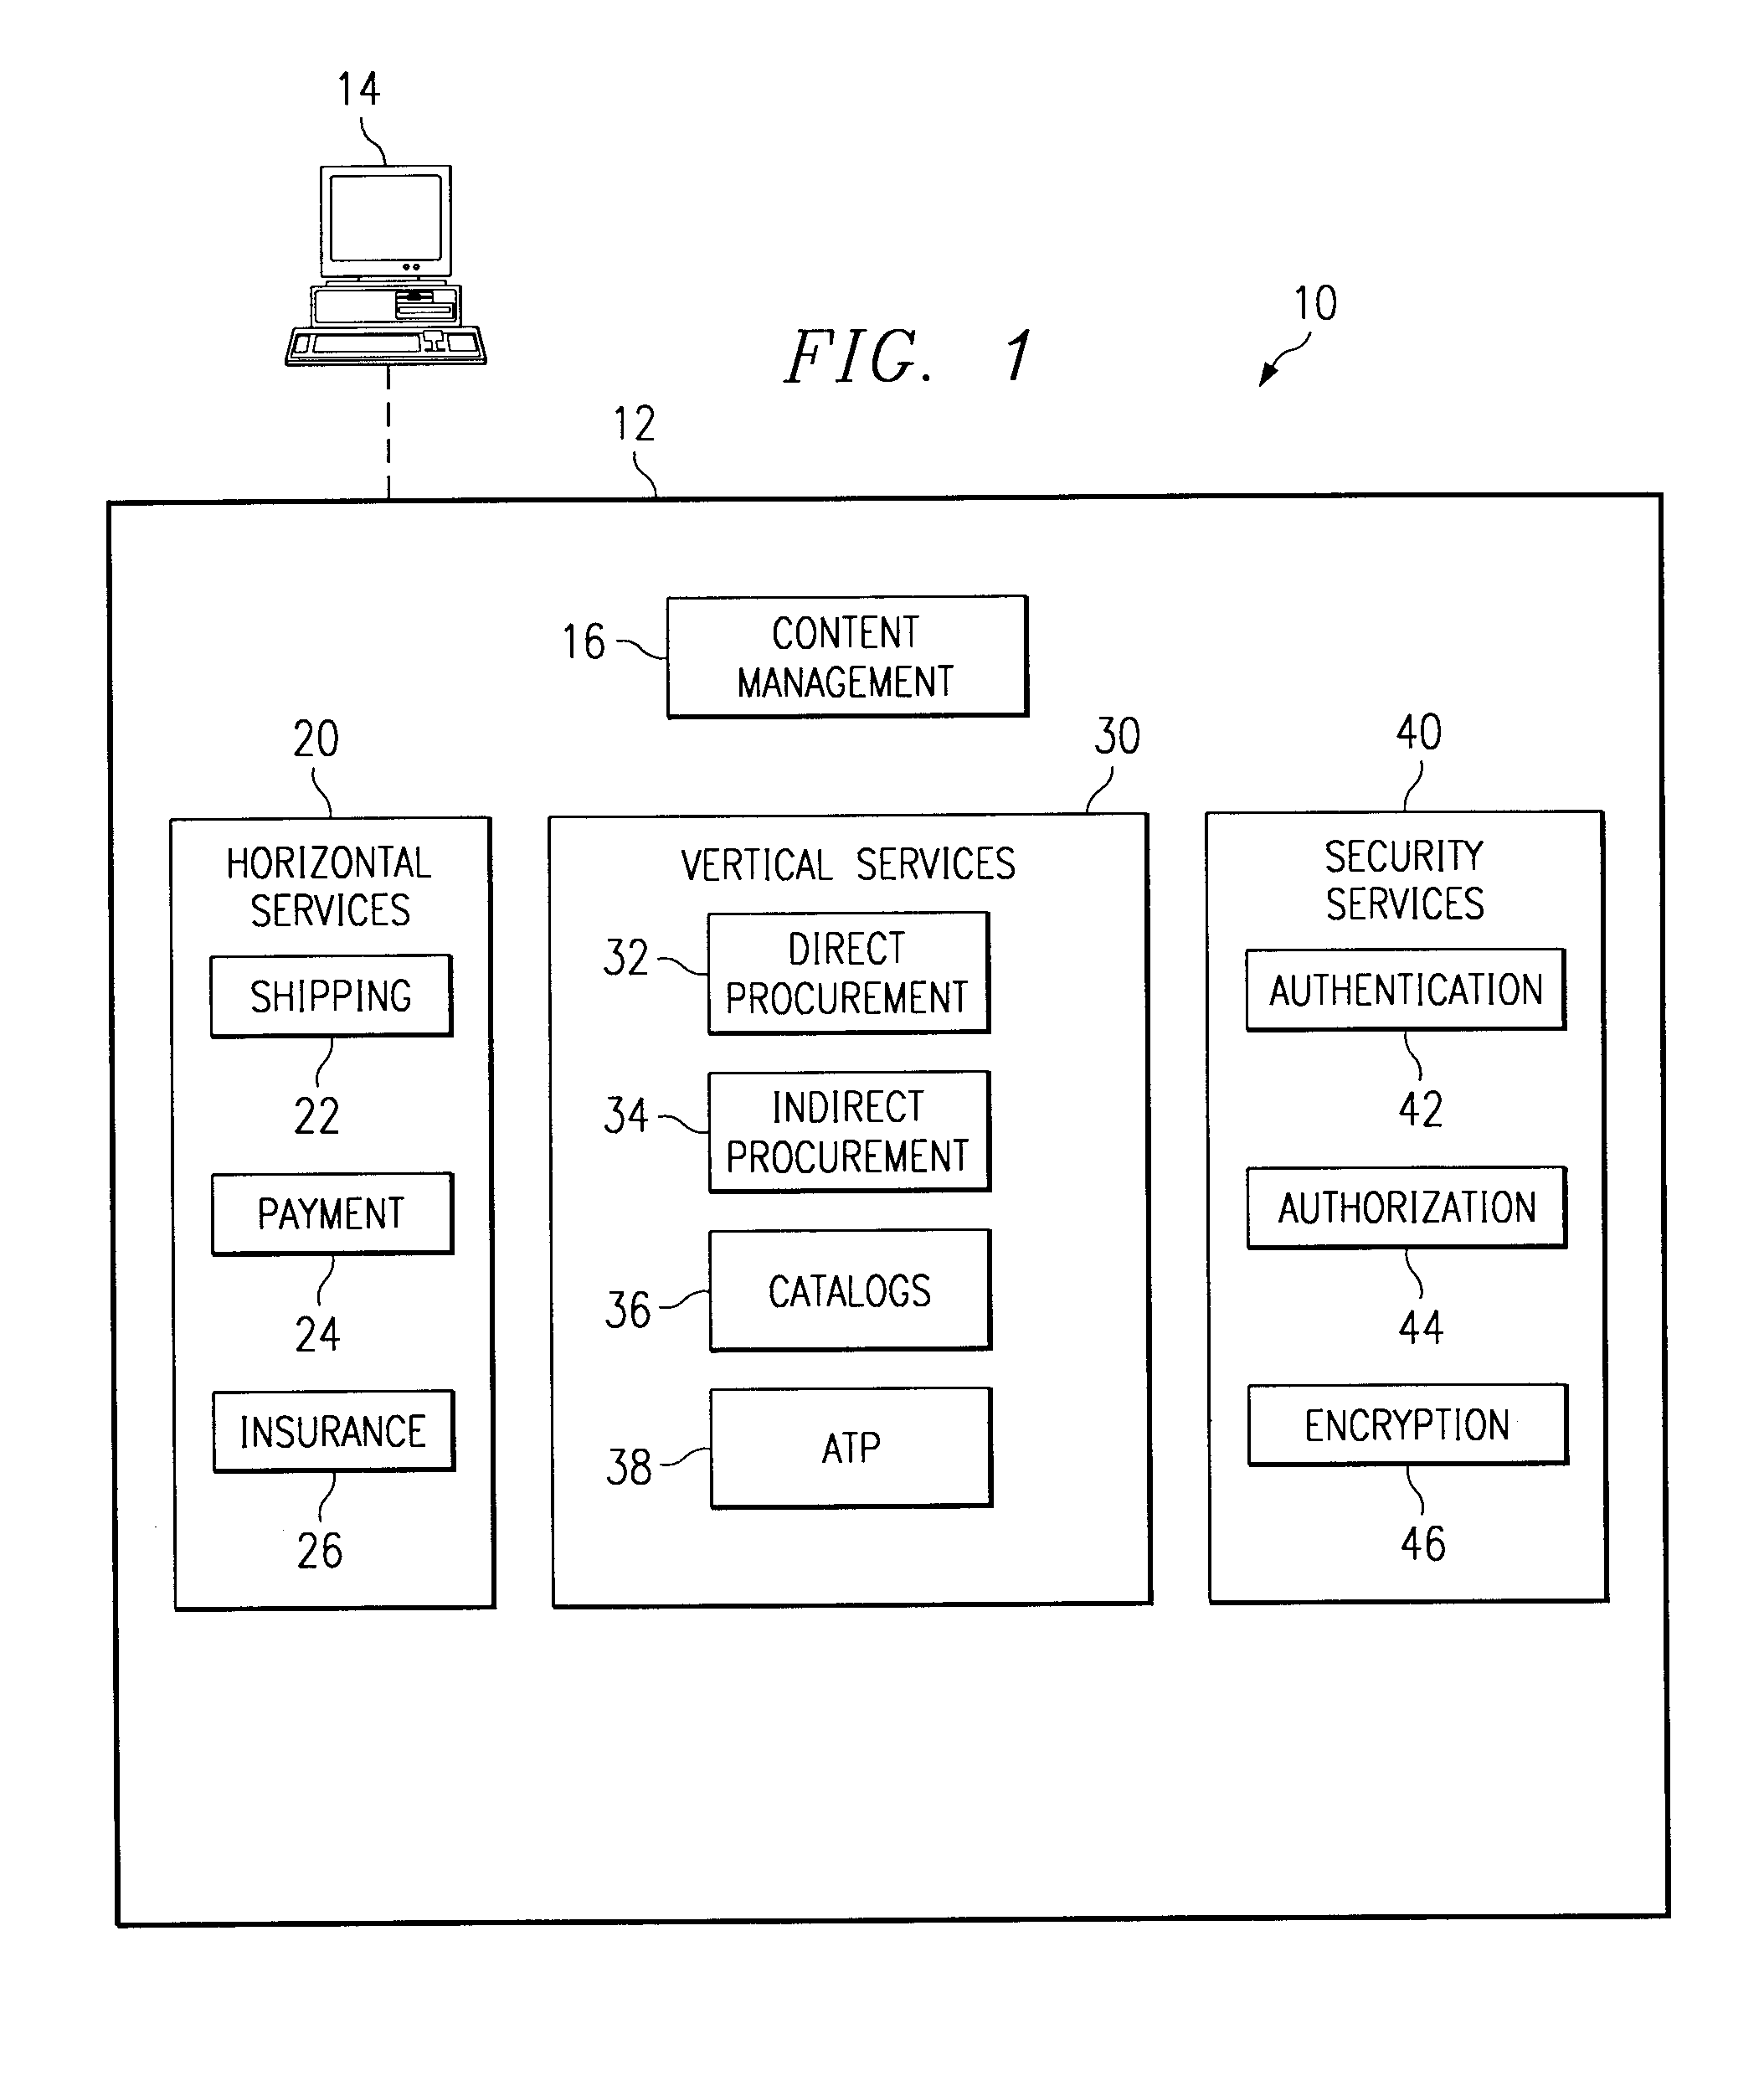 System and method for service transaction brokering among distributed marketplaces